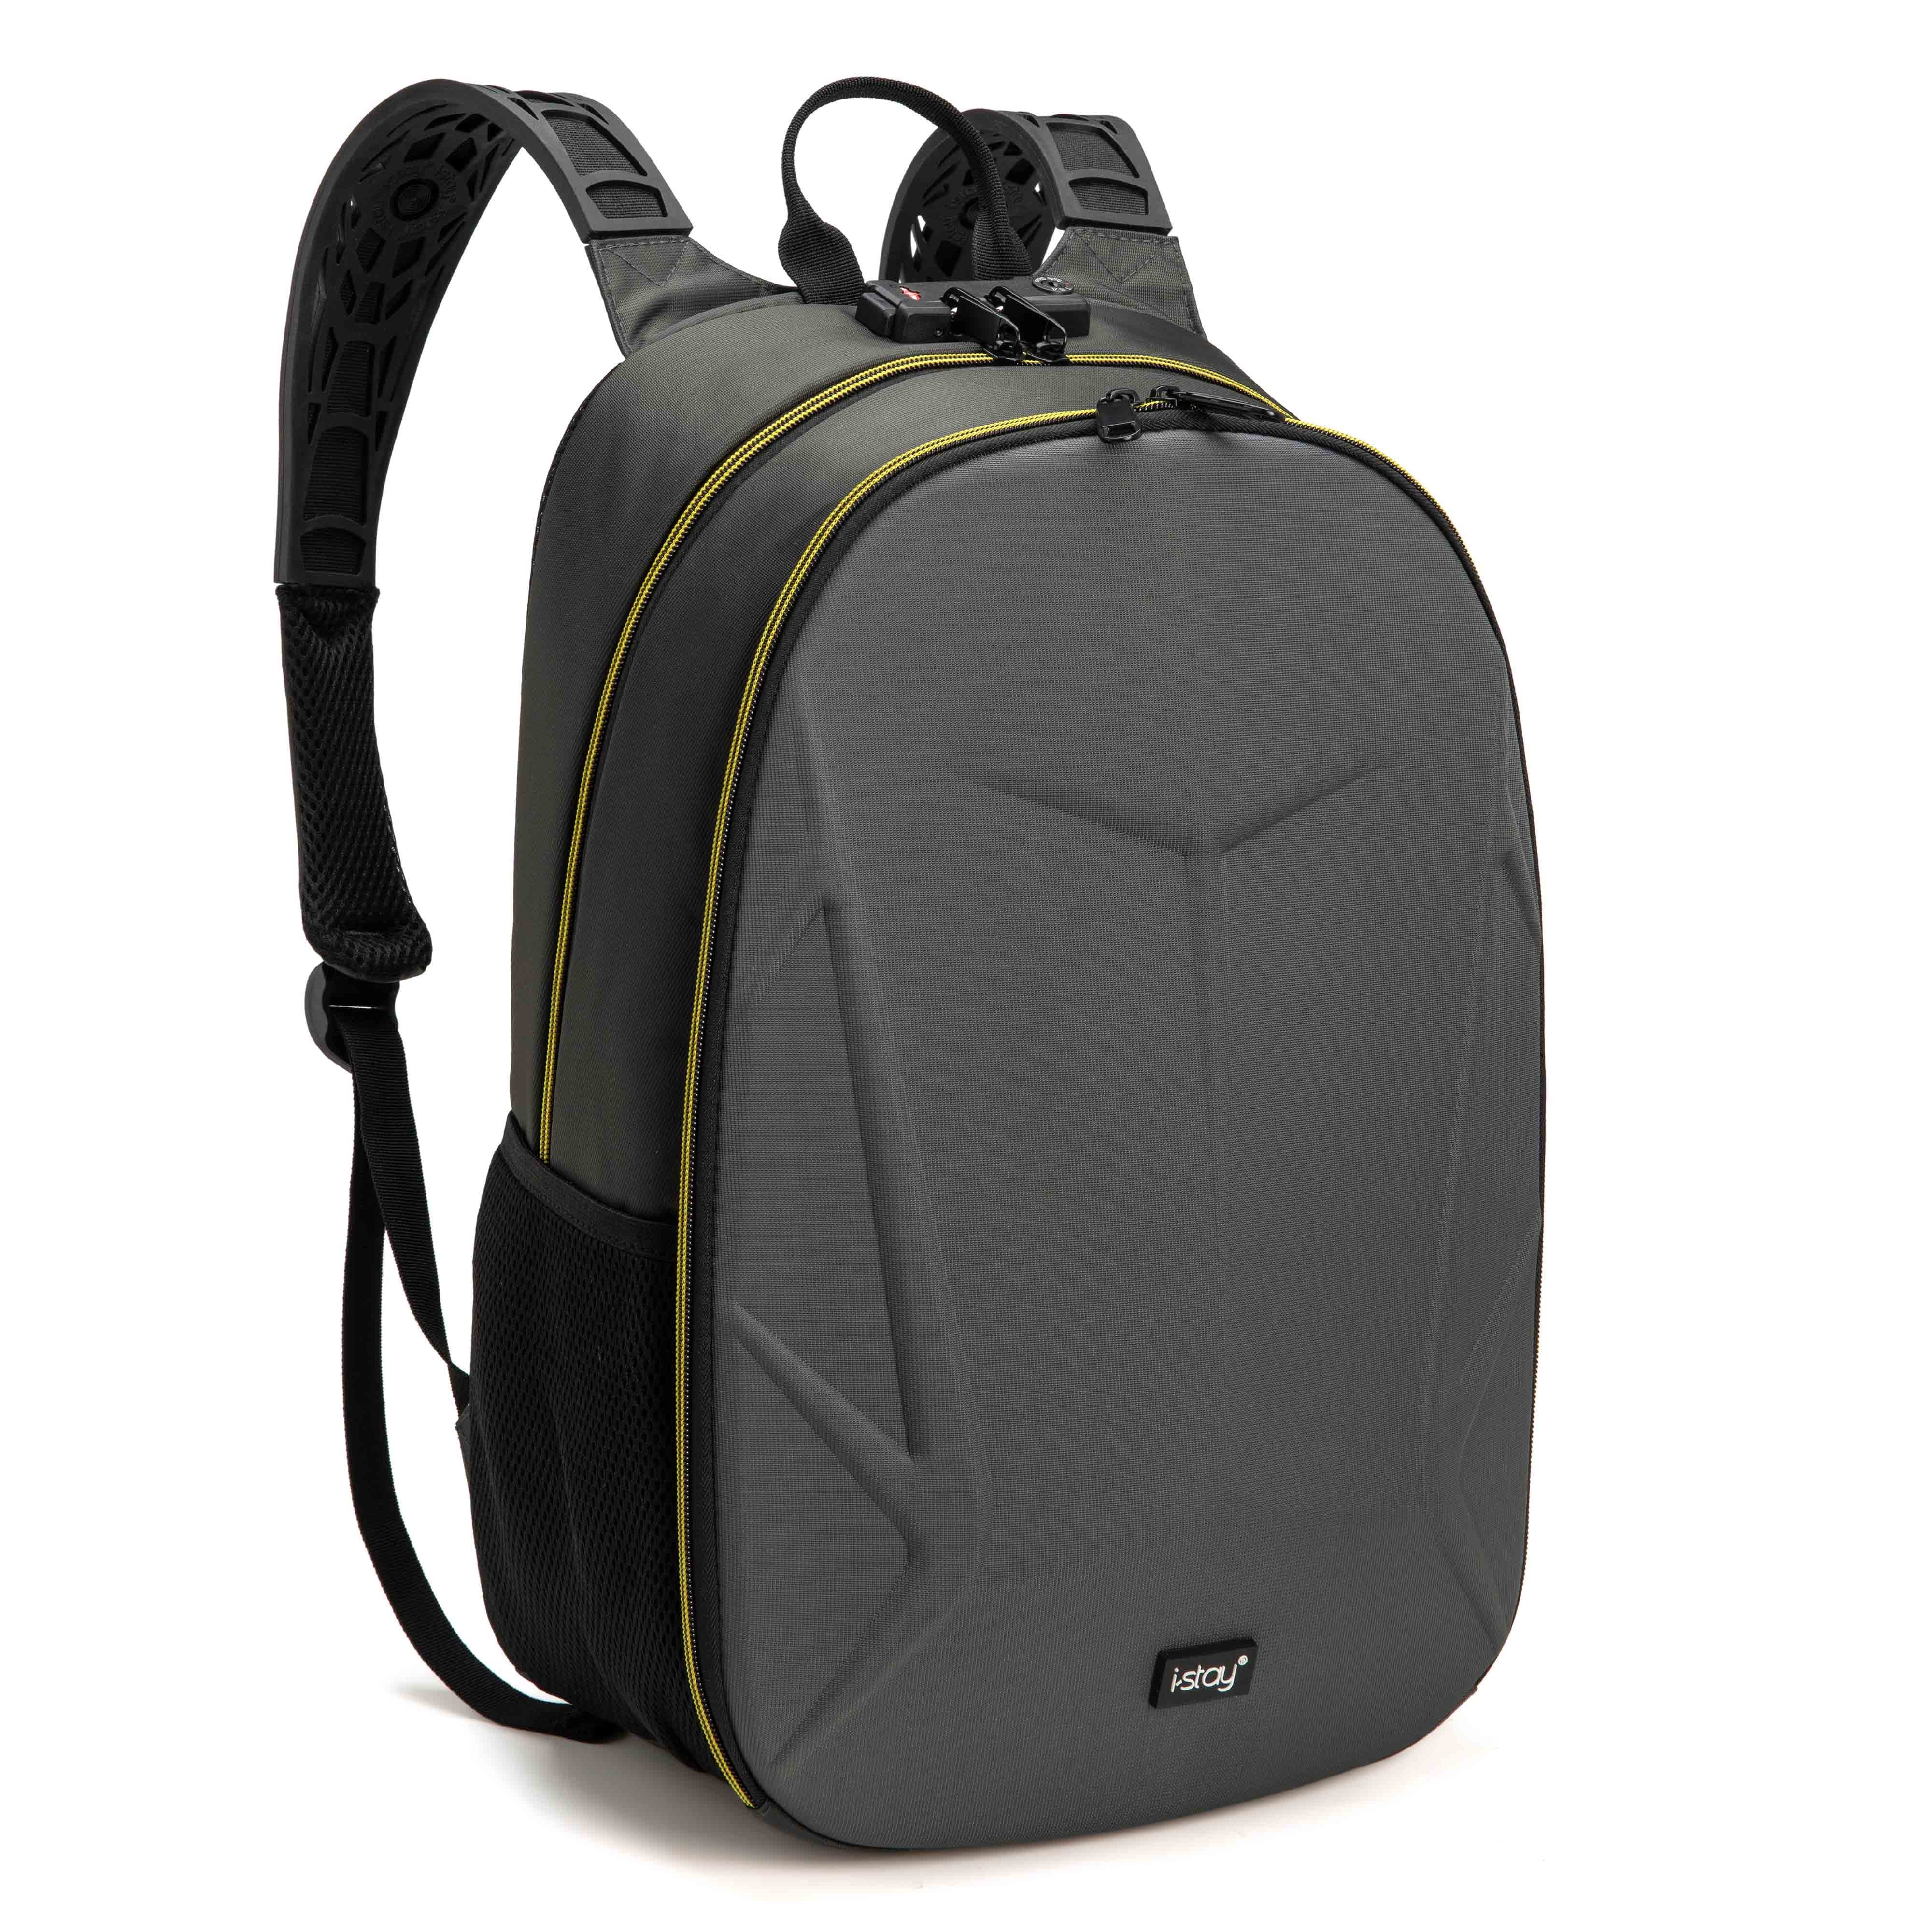 i-stay 15.6” Laptop Gaming Backpack with USB & Anti-Theft - Grey/Yellow